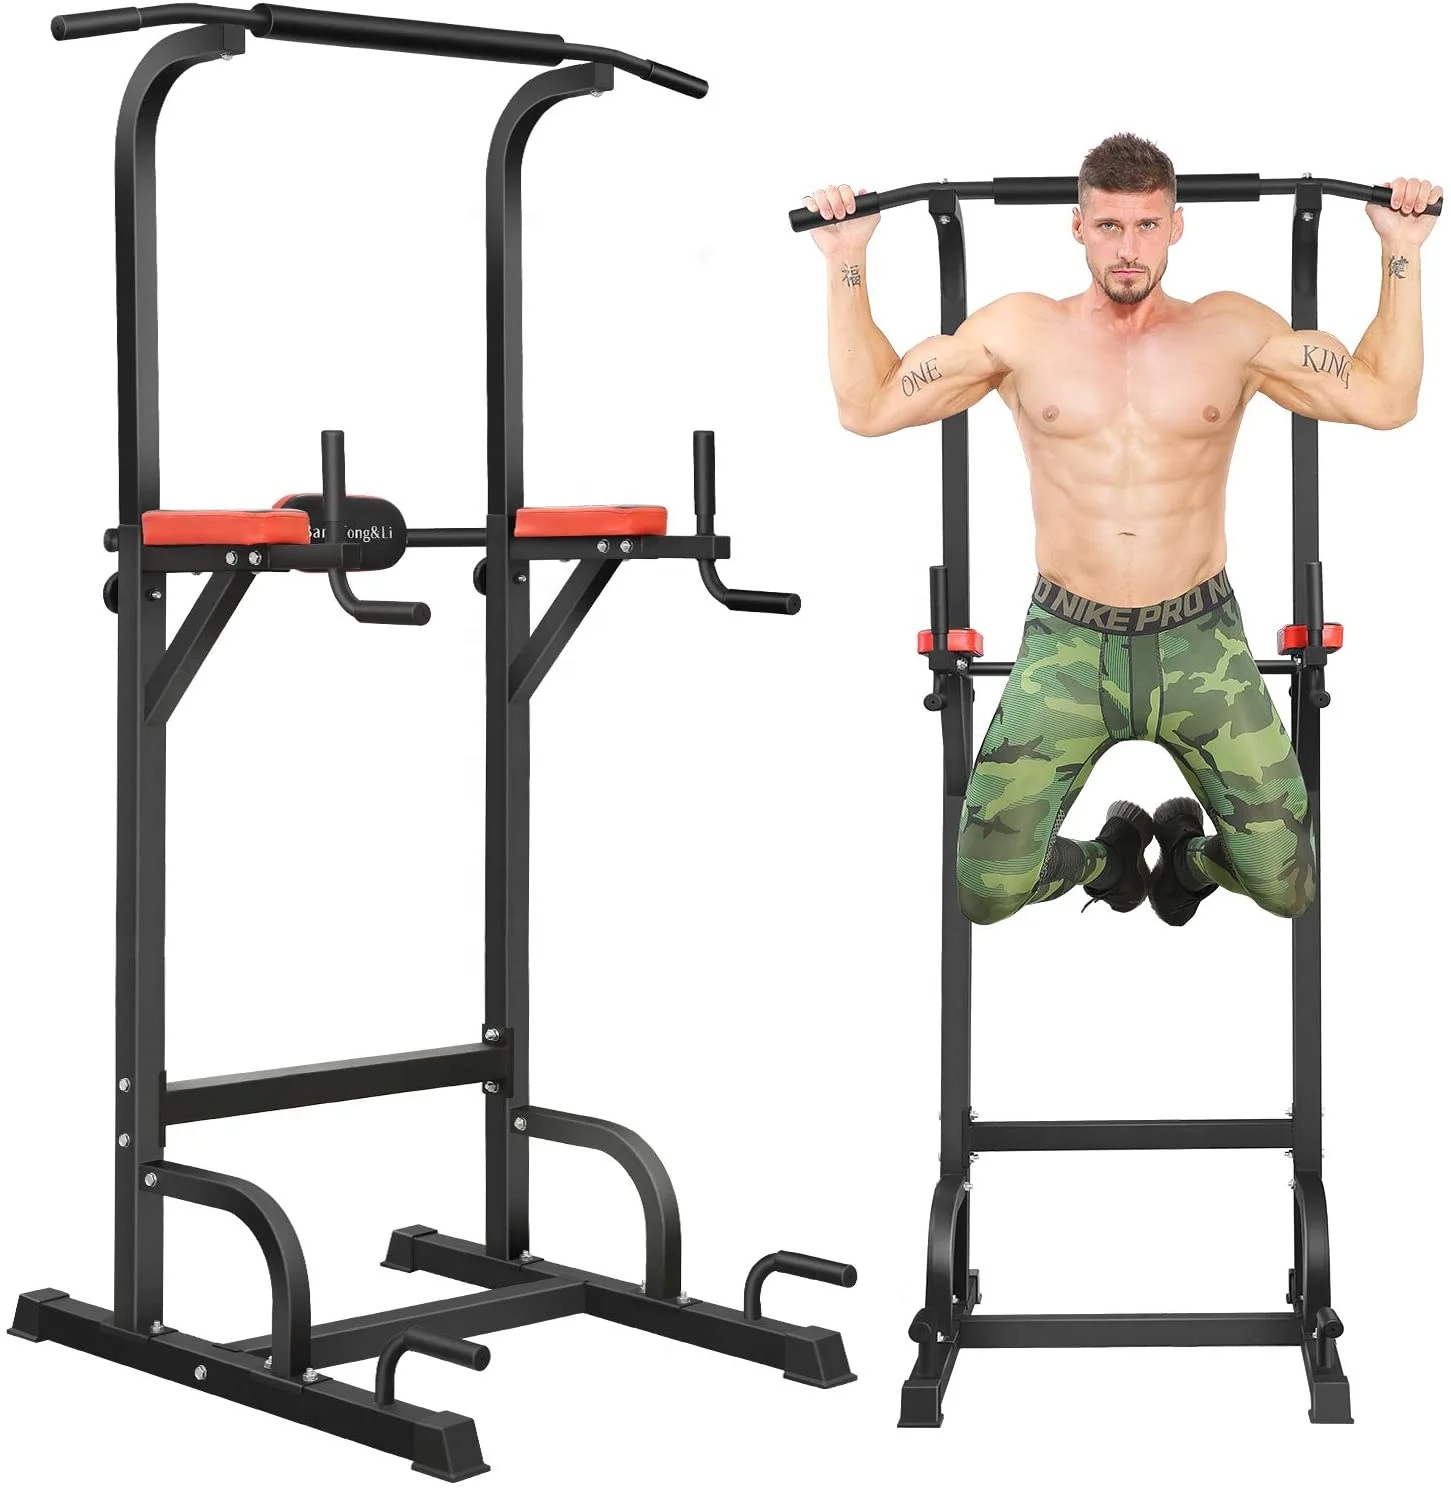 Power Tower Dip Station Pull Up Bar Exercise Fitness Adjustable WorkoutEquipment 